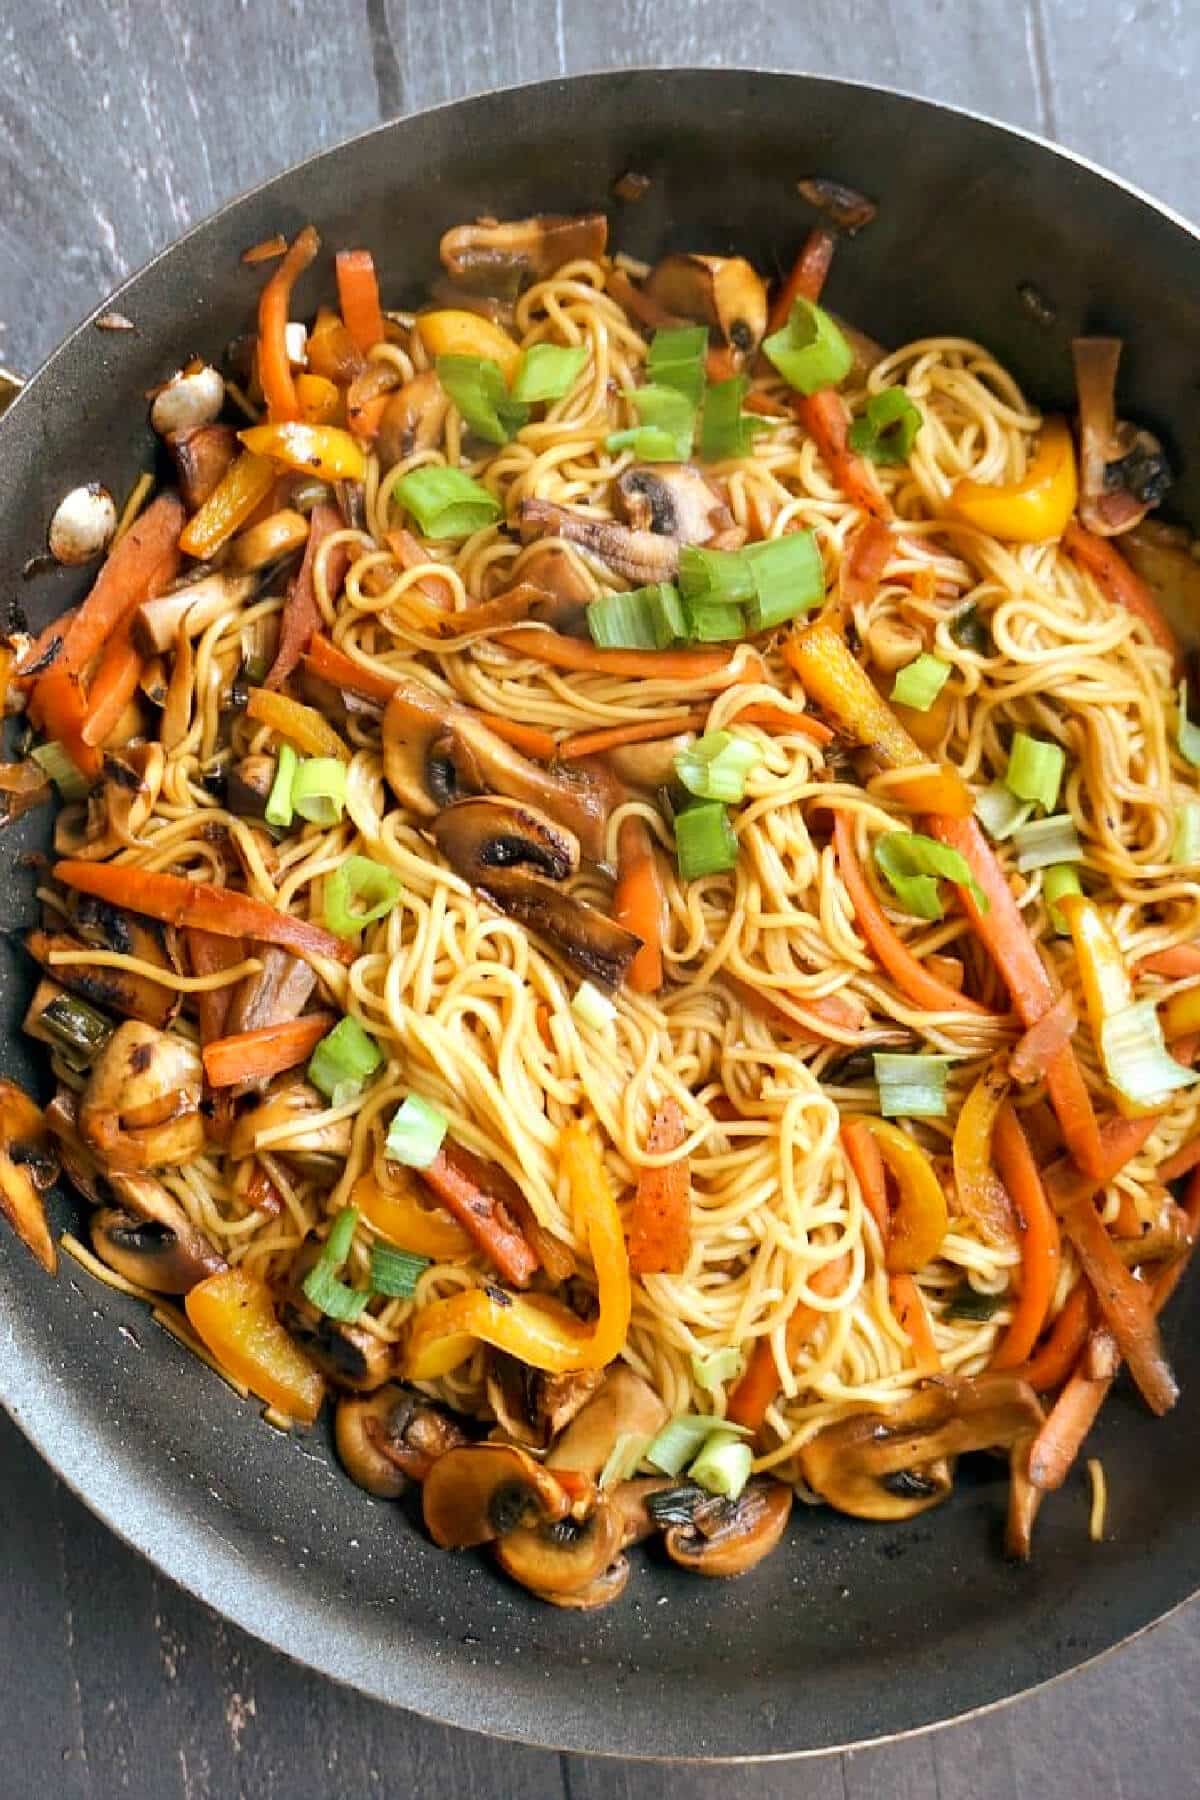 A pot with noodles and vegetable stir fry.